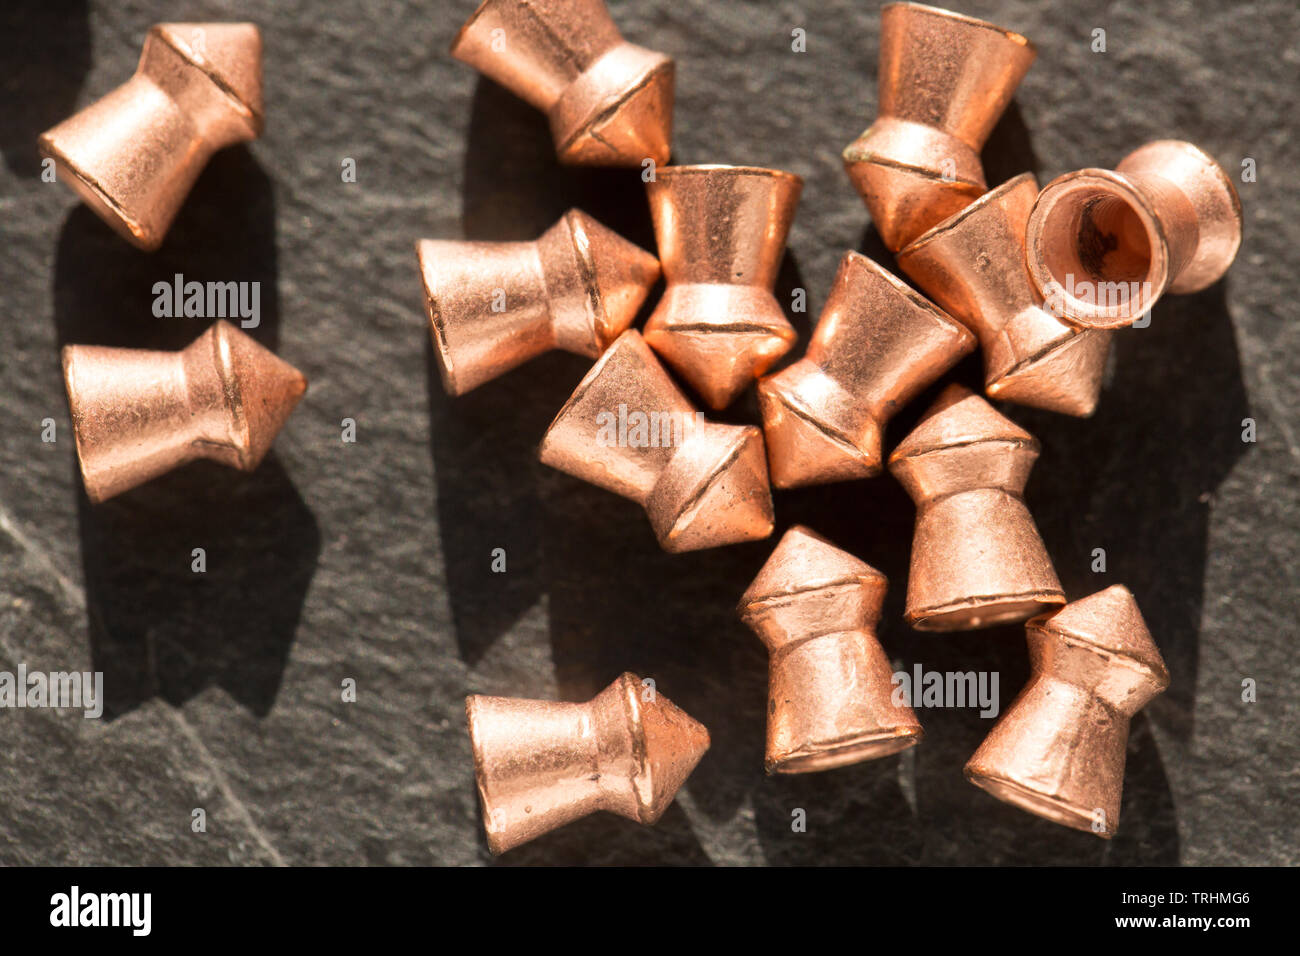 Copper-coated lead .22 calibre airgun pellets on a dark stone background that can be used in either air rifles or air pistols. England UK GB Stock Photo